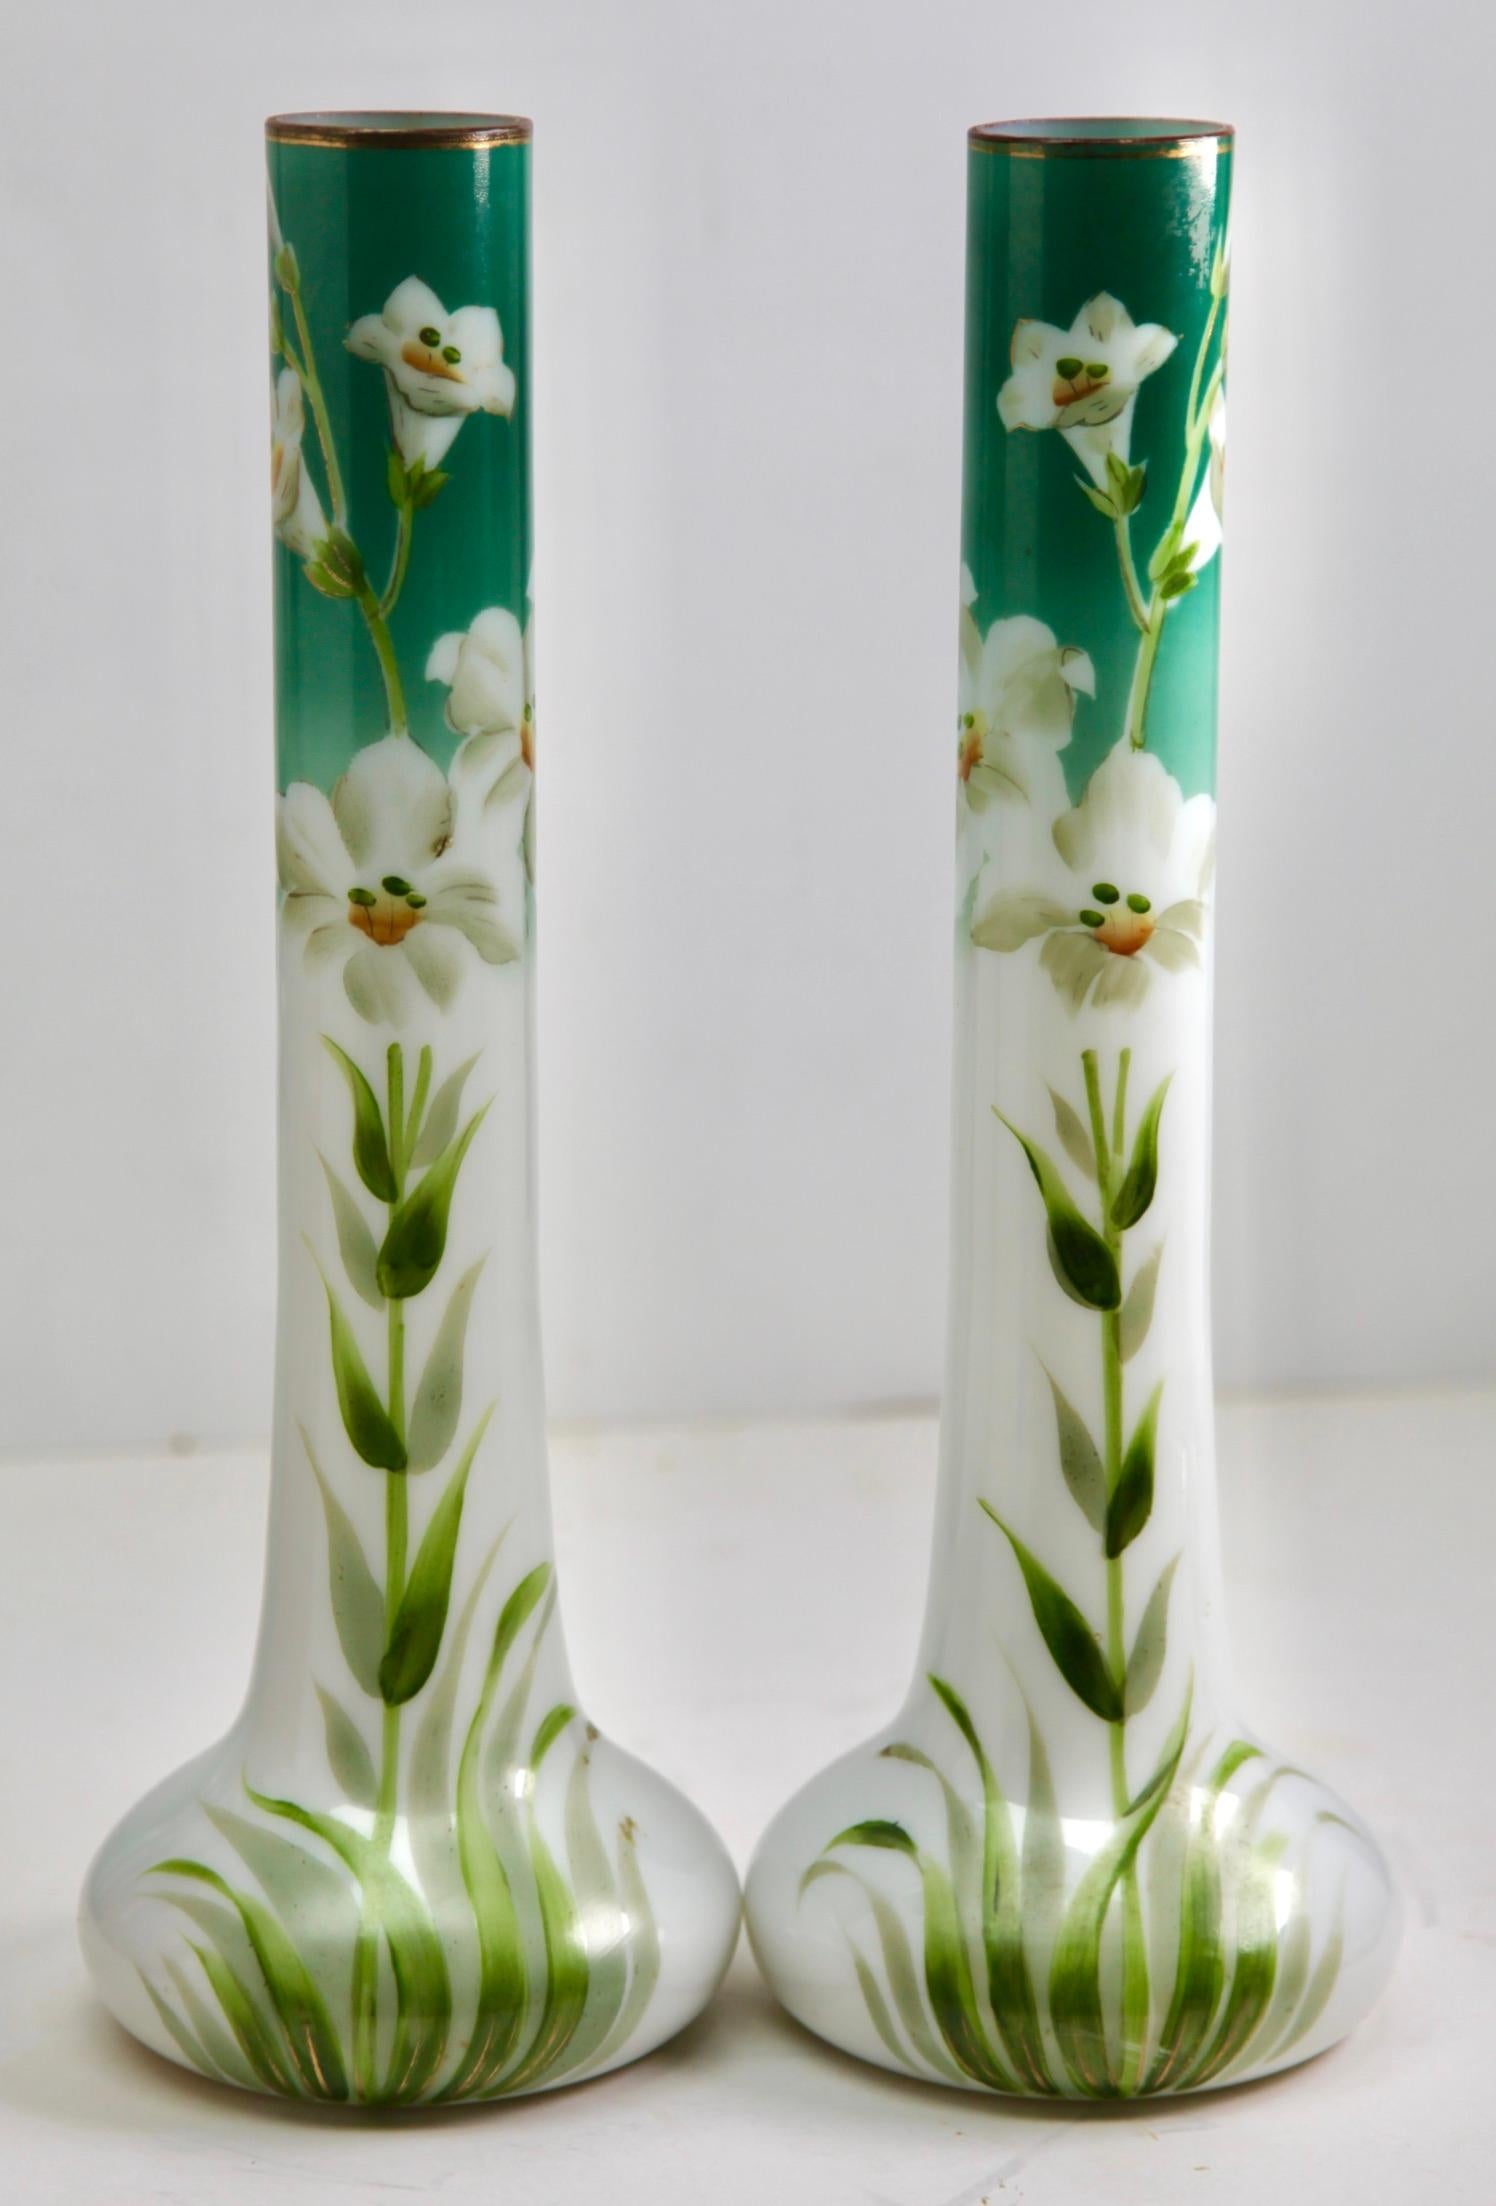 Art Nouveau Opaline glass Handmade and Hand Painted pair of vases, France, 1920s

Handmade and hand-glazed in brilliant colored Iris flowers details.
Made in France
Art Nouveau period 1920 fine quality.

The pieces are in excellent condition